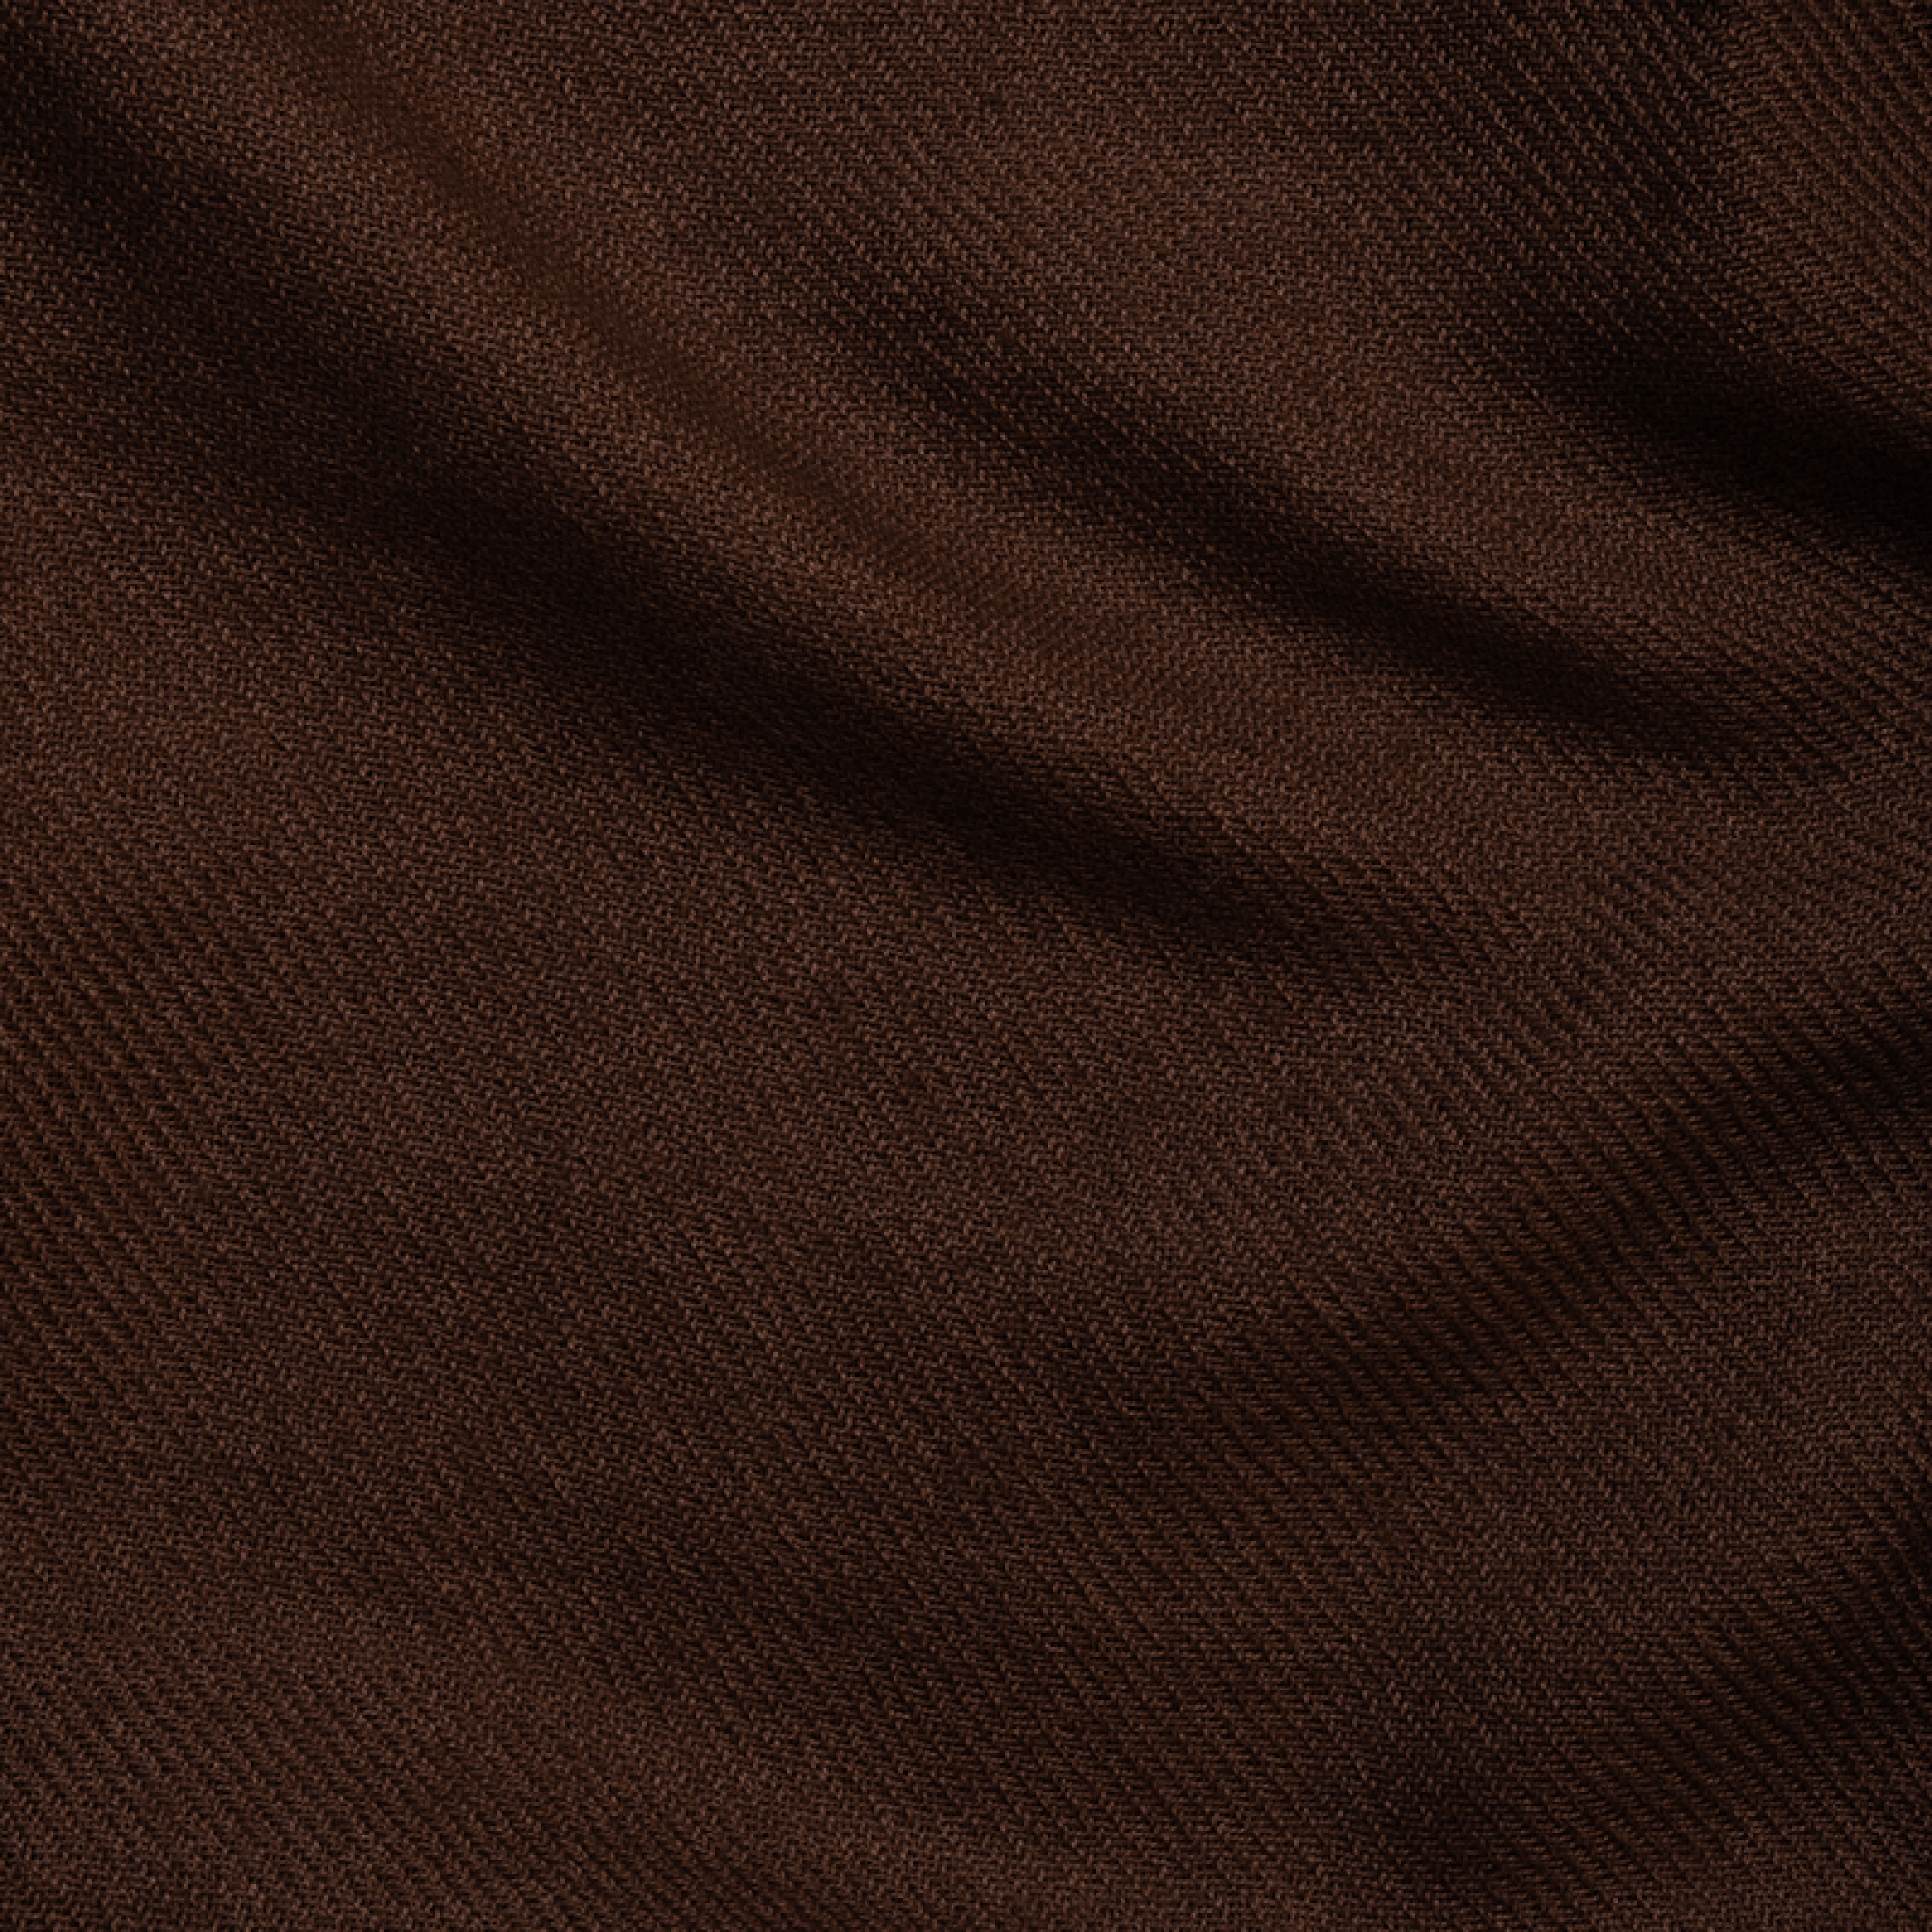 Cashmere accessories blanket toodoo plain xl 240 x 260 cacao 240 x 260 cm